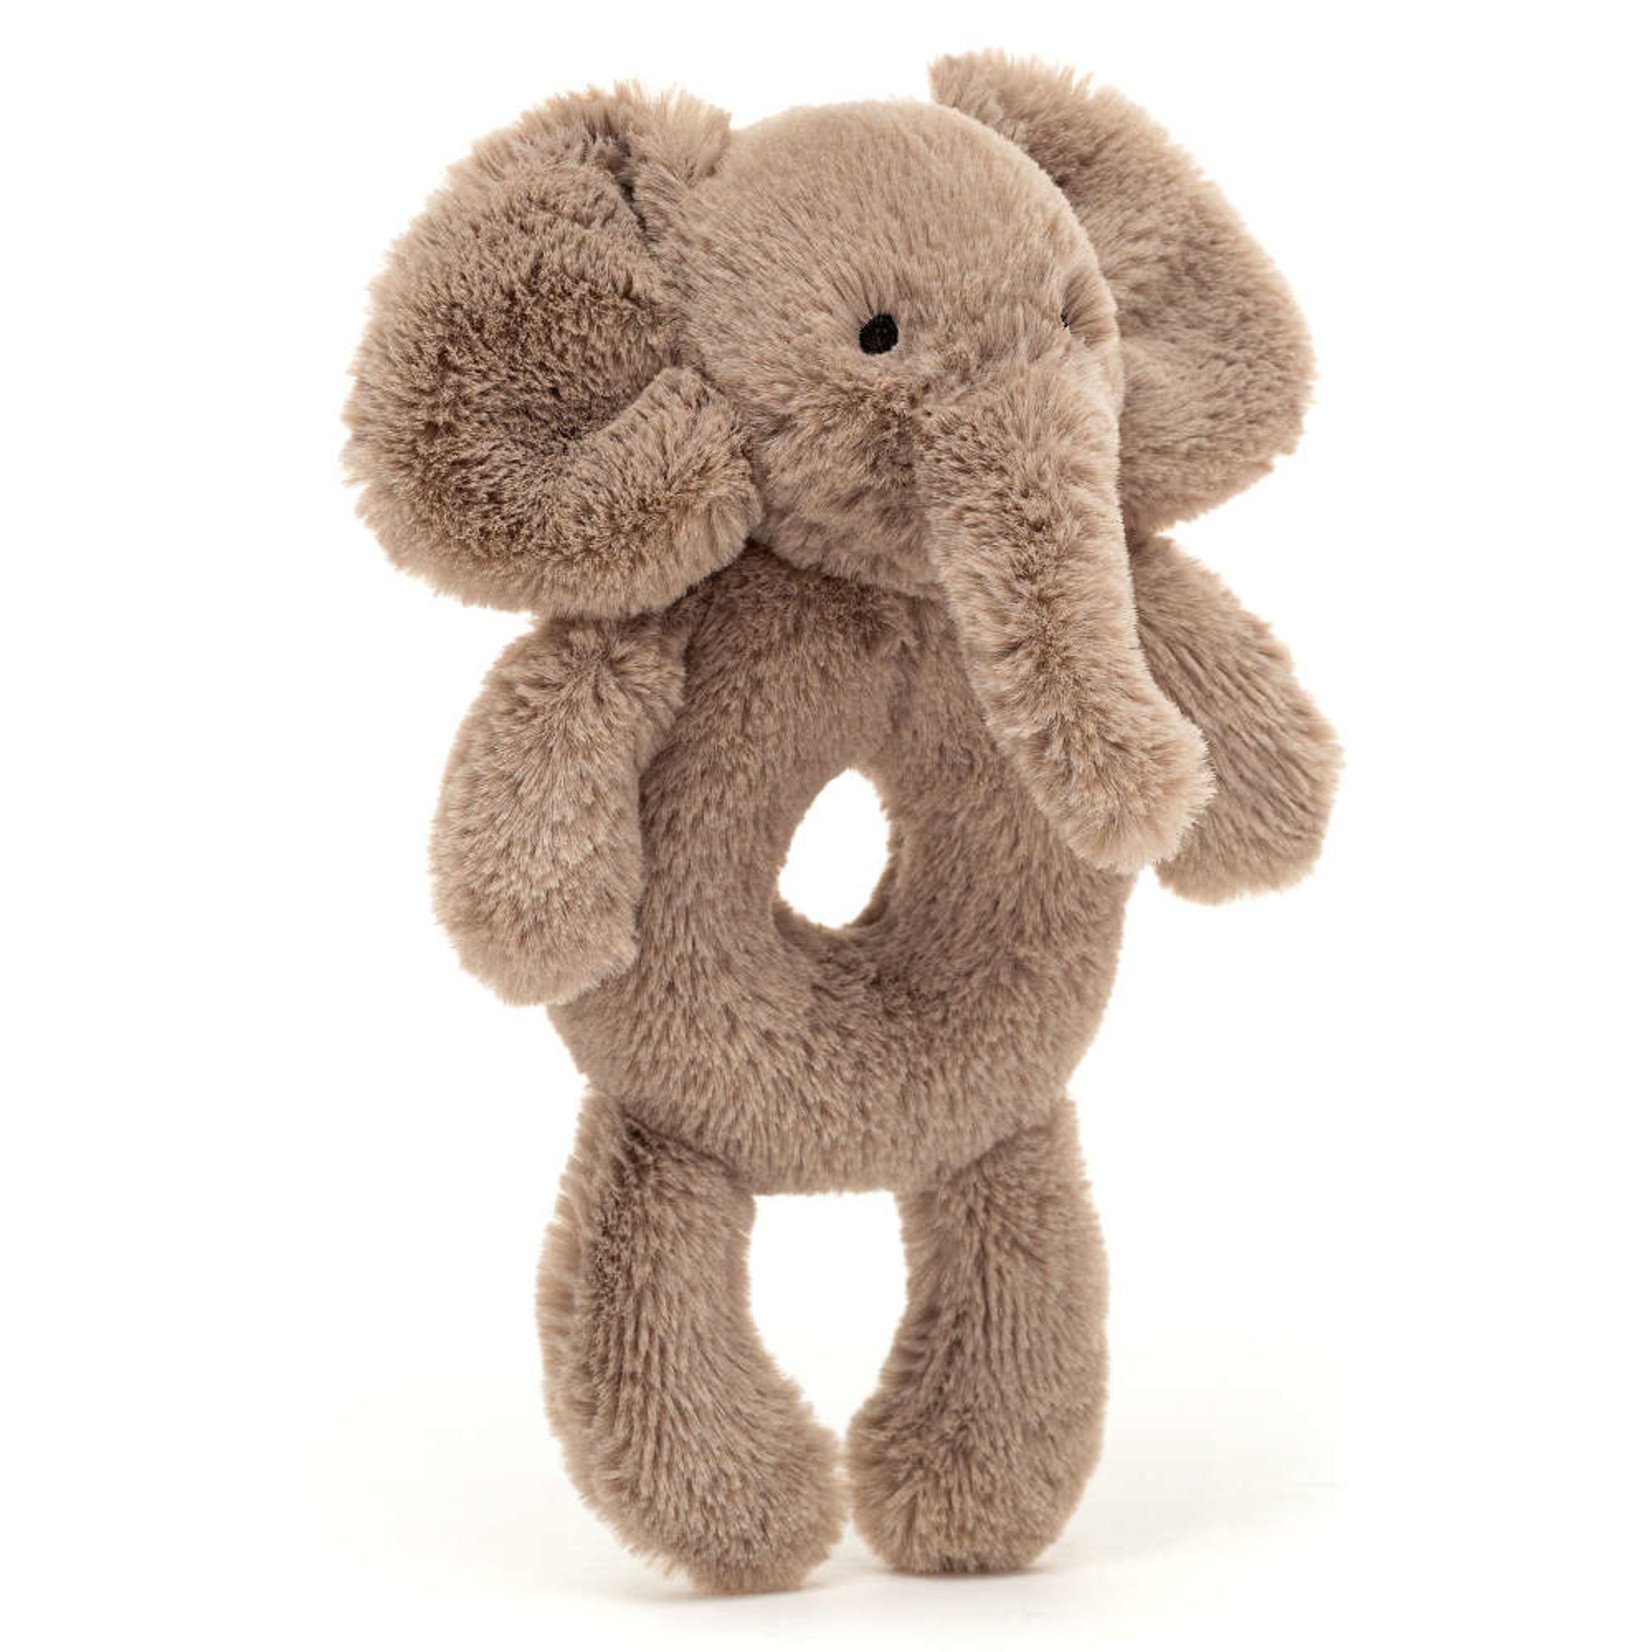 JELLYCAT Smudge Elephant Ring Rattle